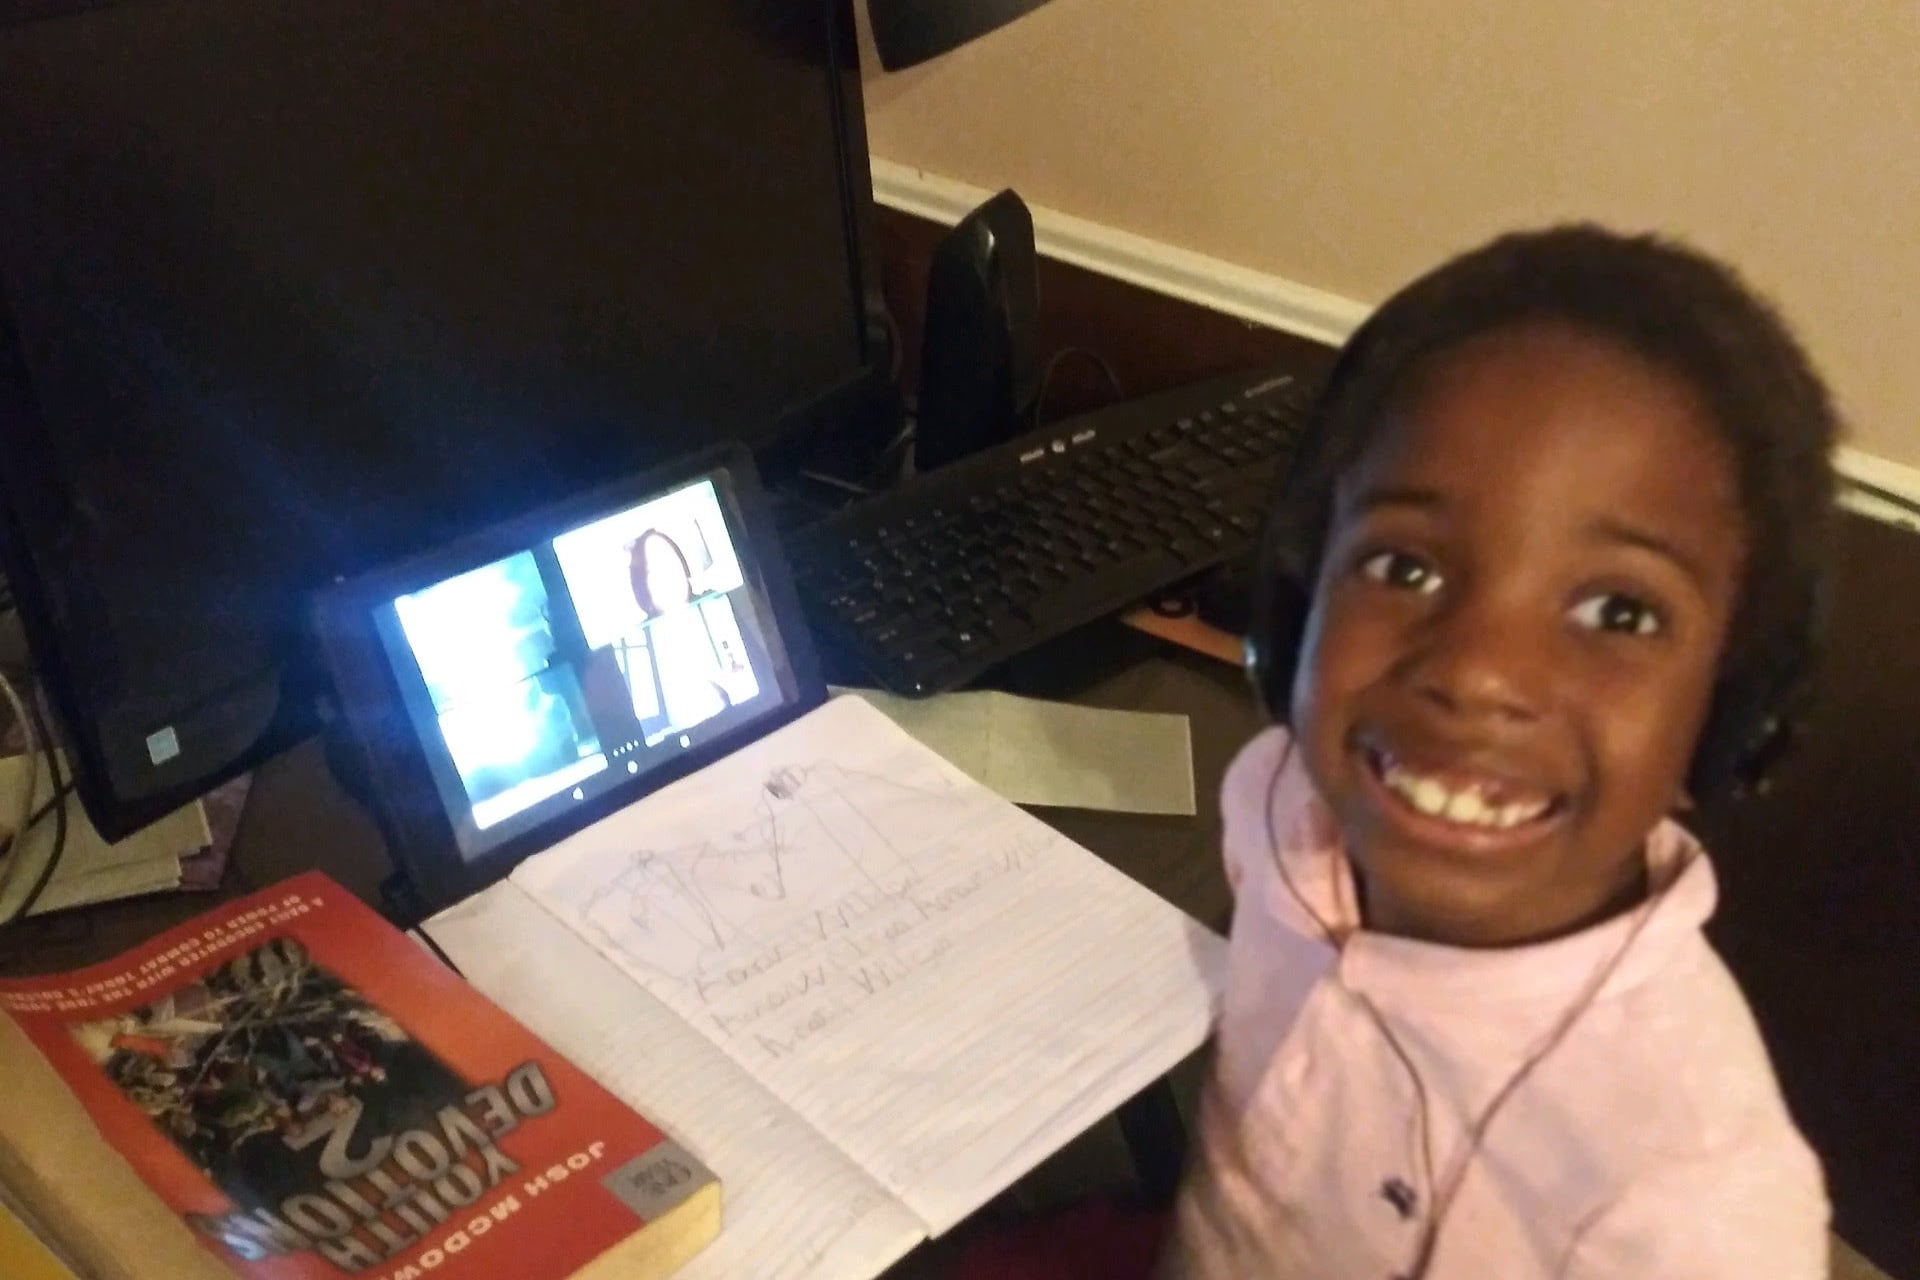 Six-year-old child practices writing his name with his teacher via video conference